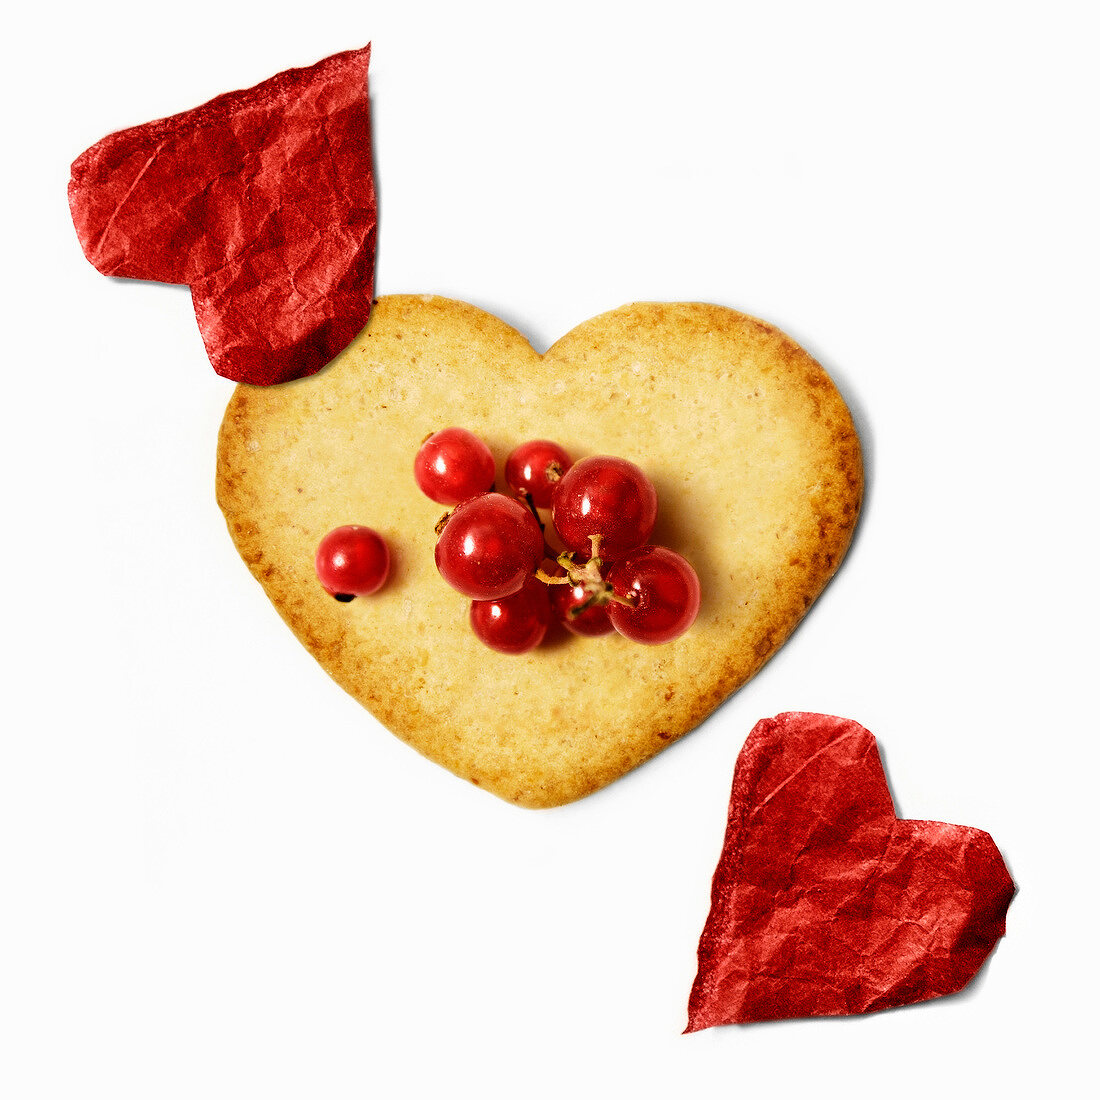 Heart-shaped biscuit with redcurrants and red paper hearts